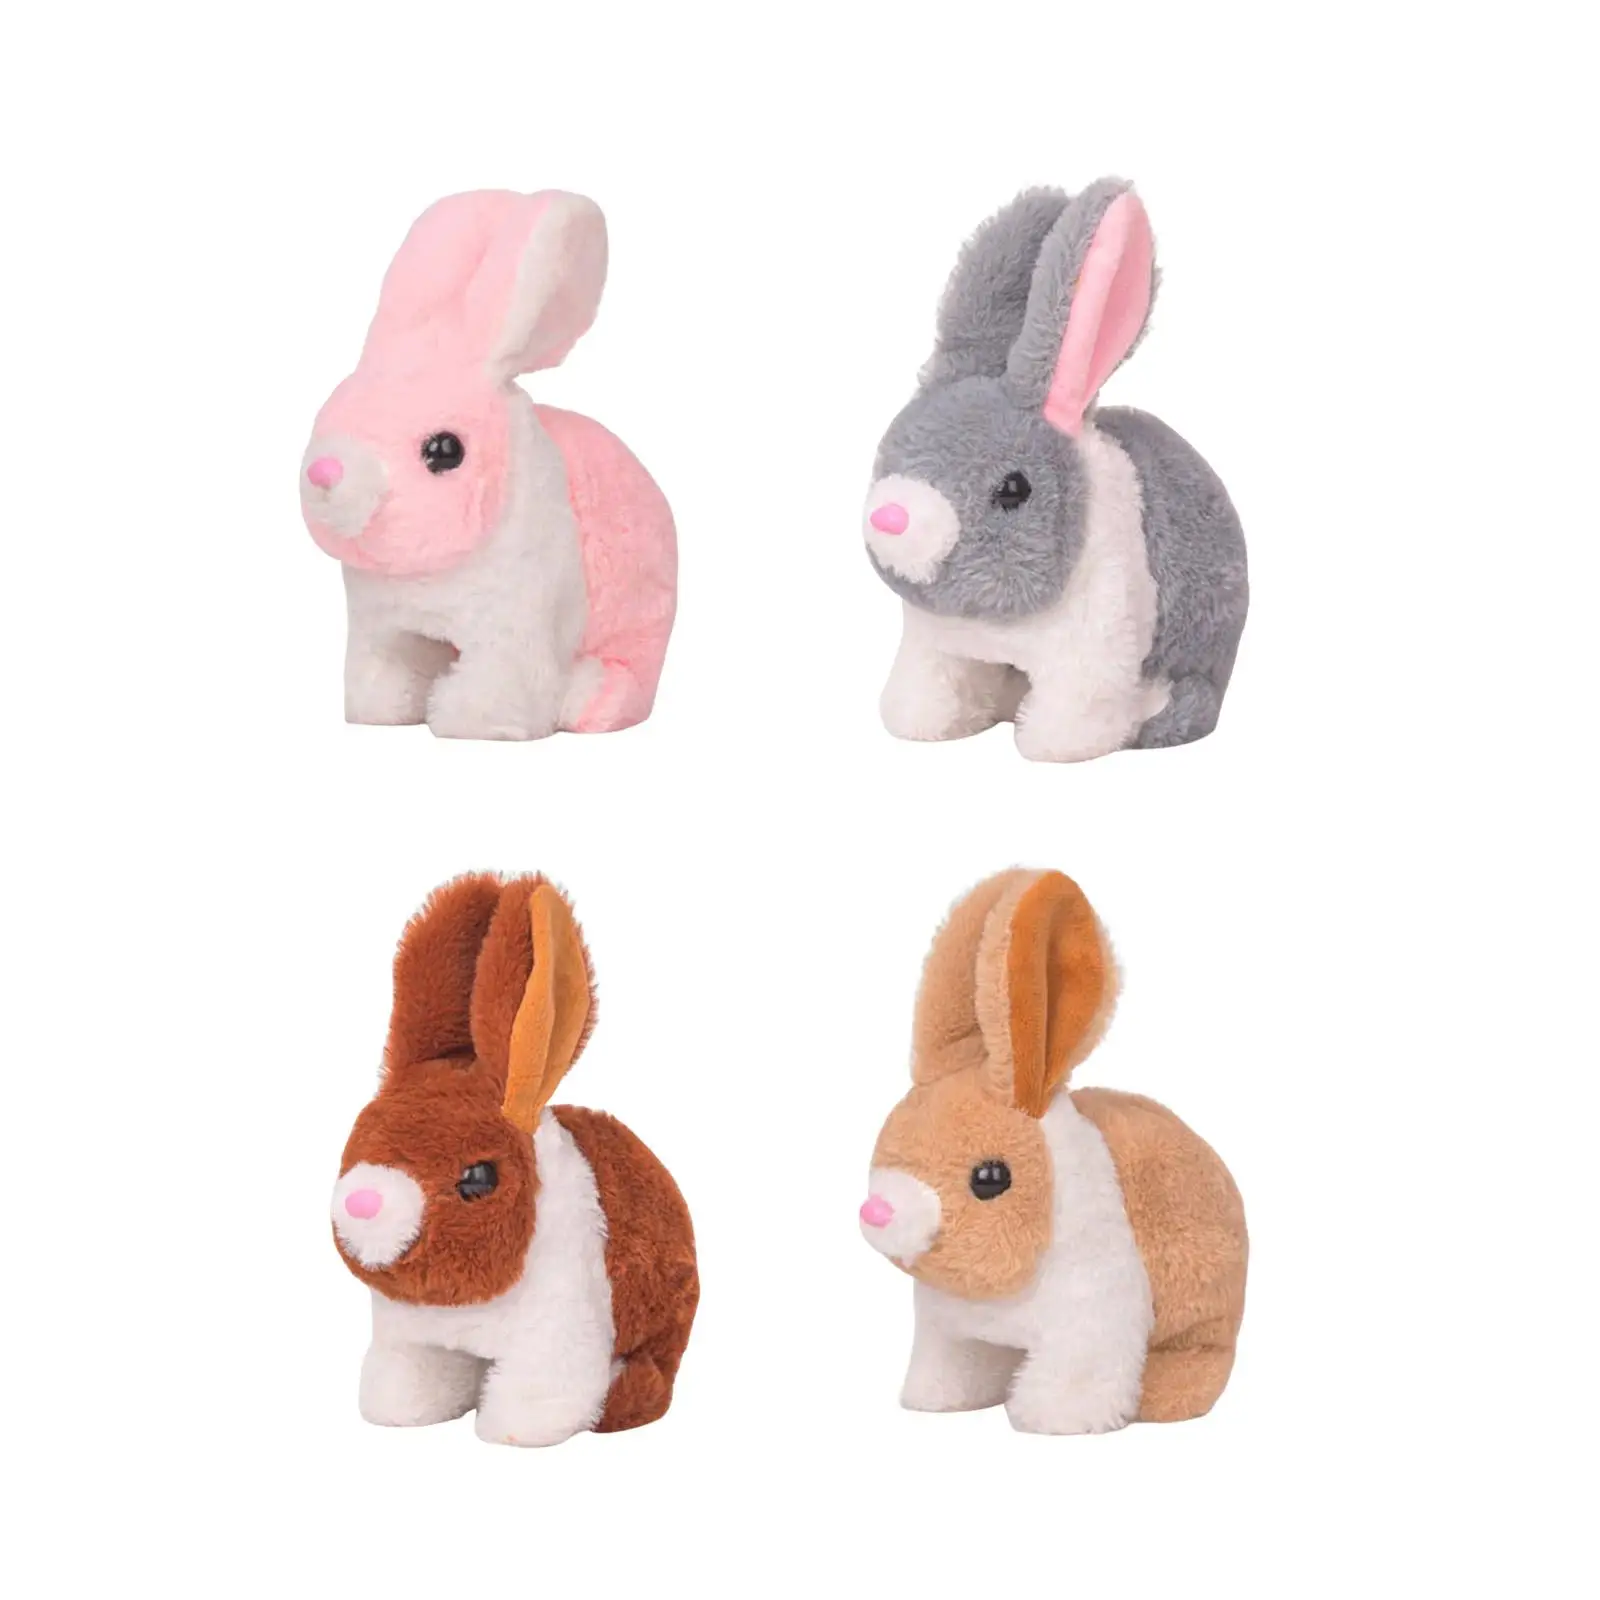 Electric Bunny Toys Novelty,Electric Plush Toy with Sound and Movements, Stuffed Animal for Holiday